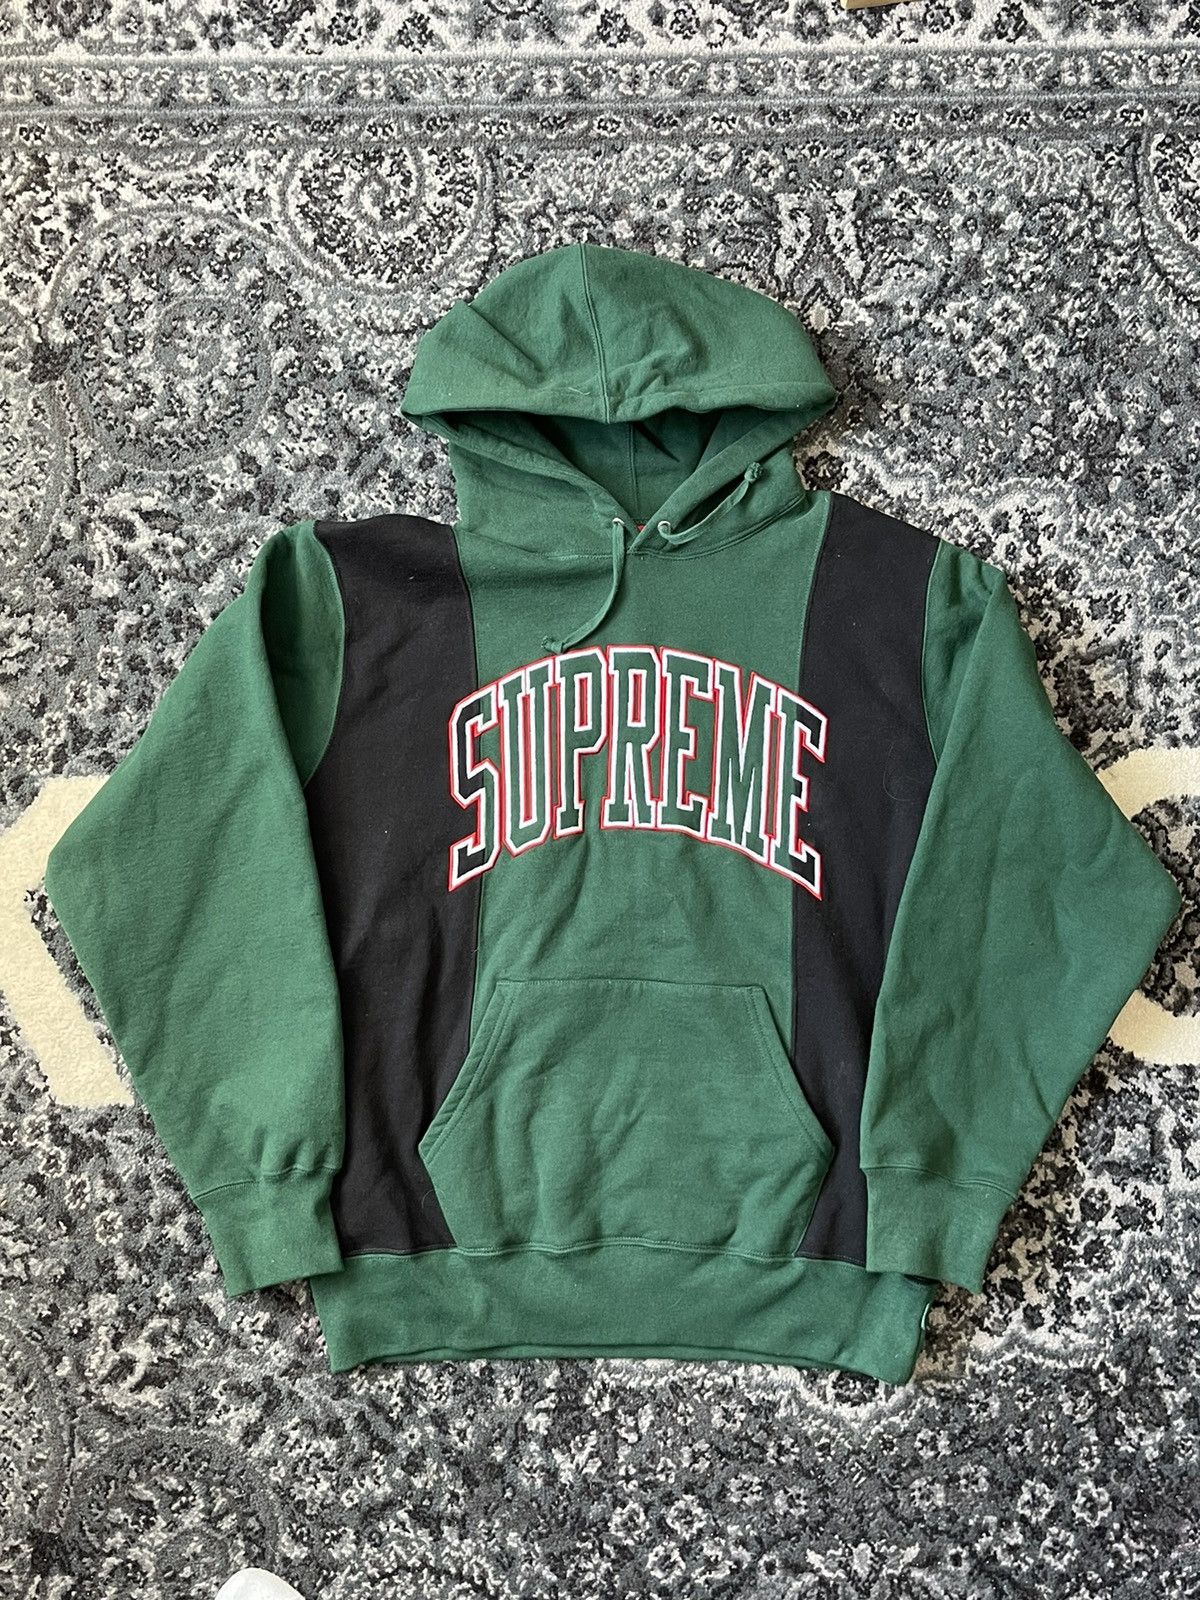 Pre-owned Supreme Green Paneled Arc Hoodie Size Large